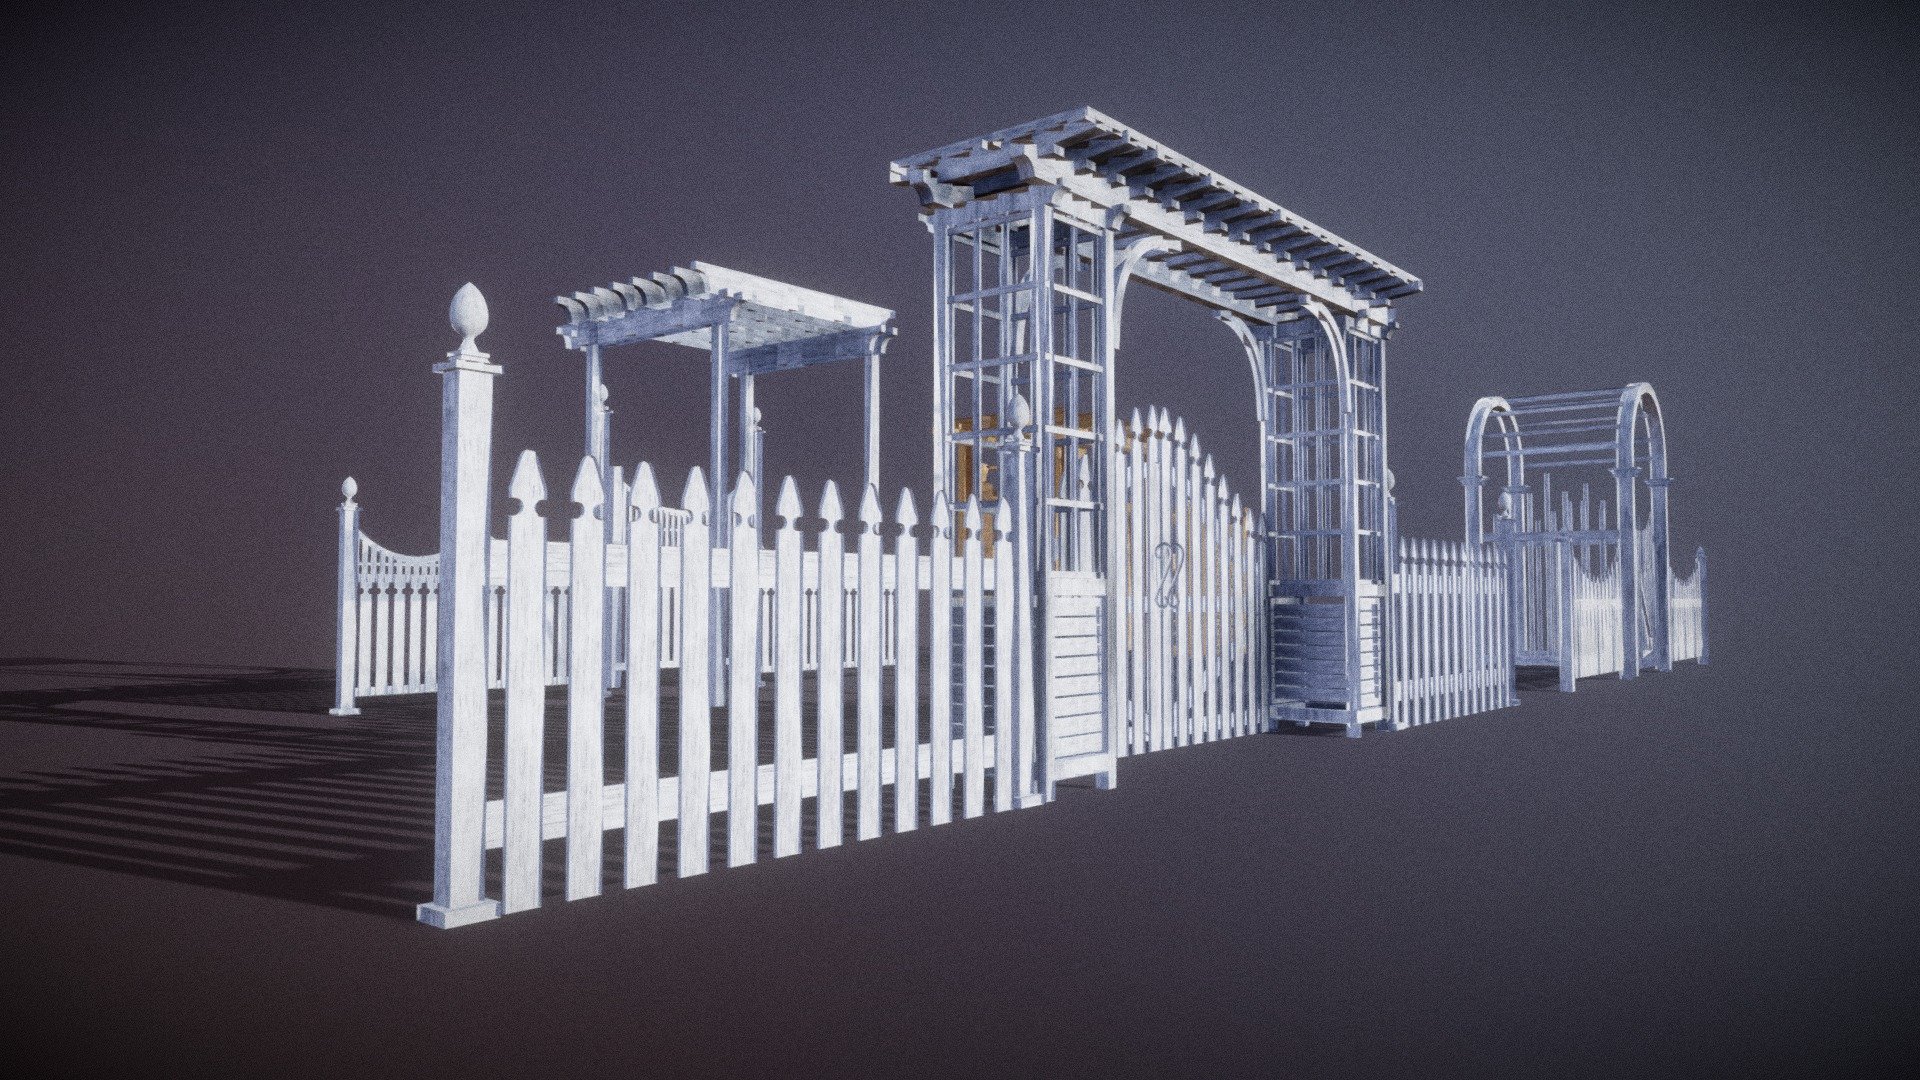 Modular Wooden Fence Collection with all textures and fbx included in the Additional File.

Asset Pack Description:-

5 Types of Modular Fences
Gates with Pergola
2 textures one white and one brown
fbx file included

Additional Files Structure

Export Folder contain all the fbx model
Texture folder contain all the Textures
Fence blend file

Thank you! - Modular Wooden Fence Collection - Buy Royalty Free 3D model by Nicholas-3D (@Nicholas01) 3d model